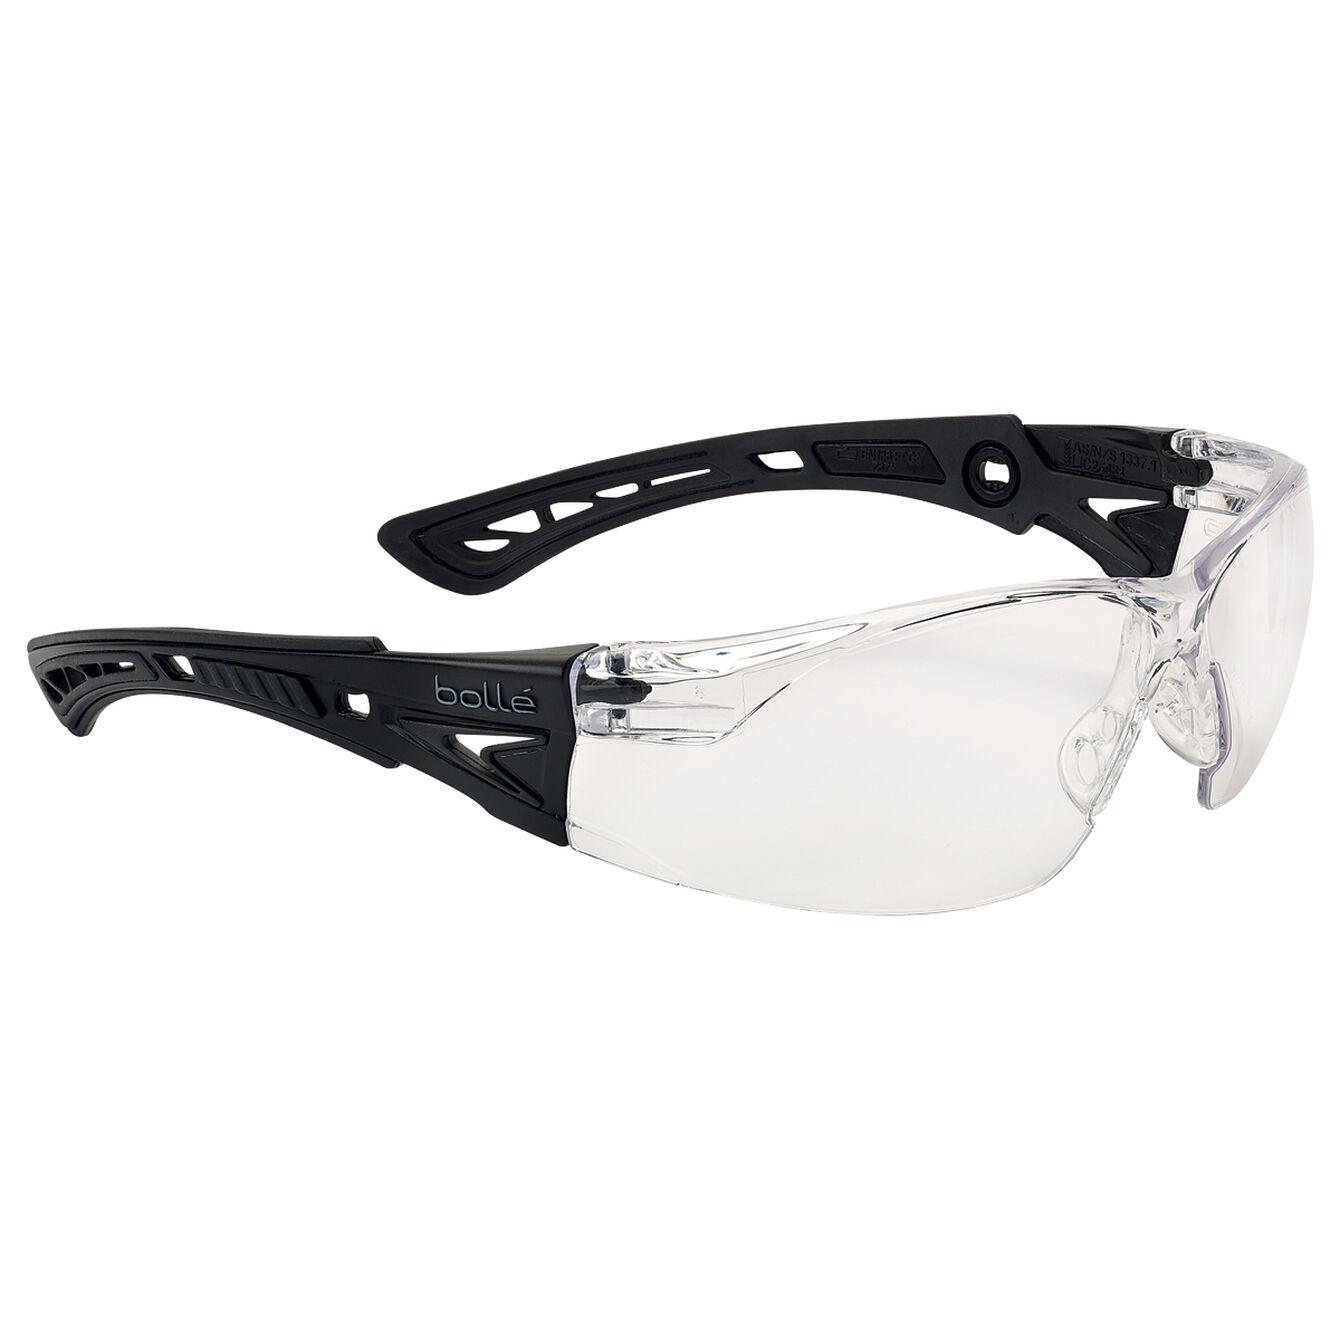 Bollé Safety RUSH+ BSSI safety glasses